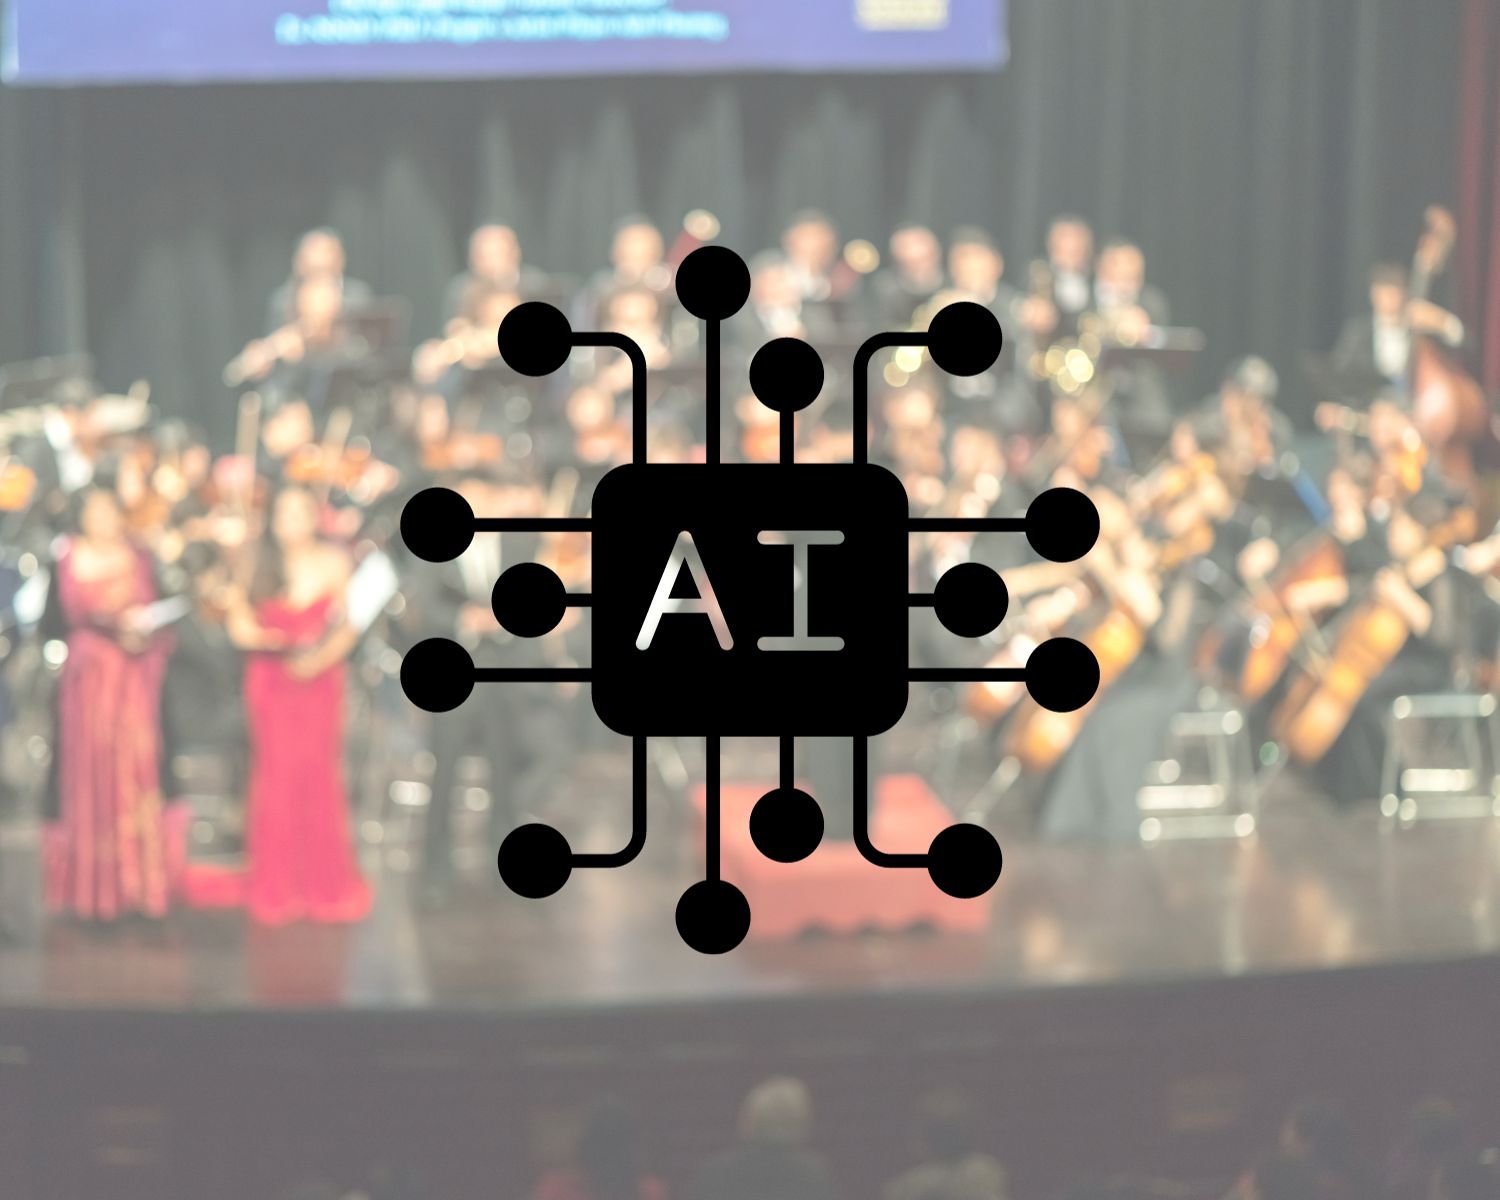 How can AI help a symphony orchestra?